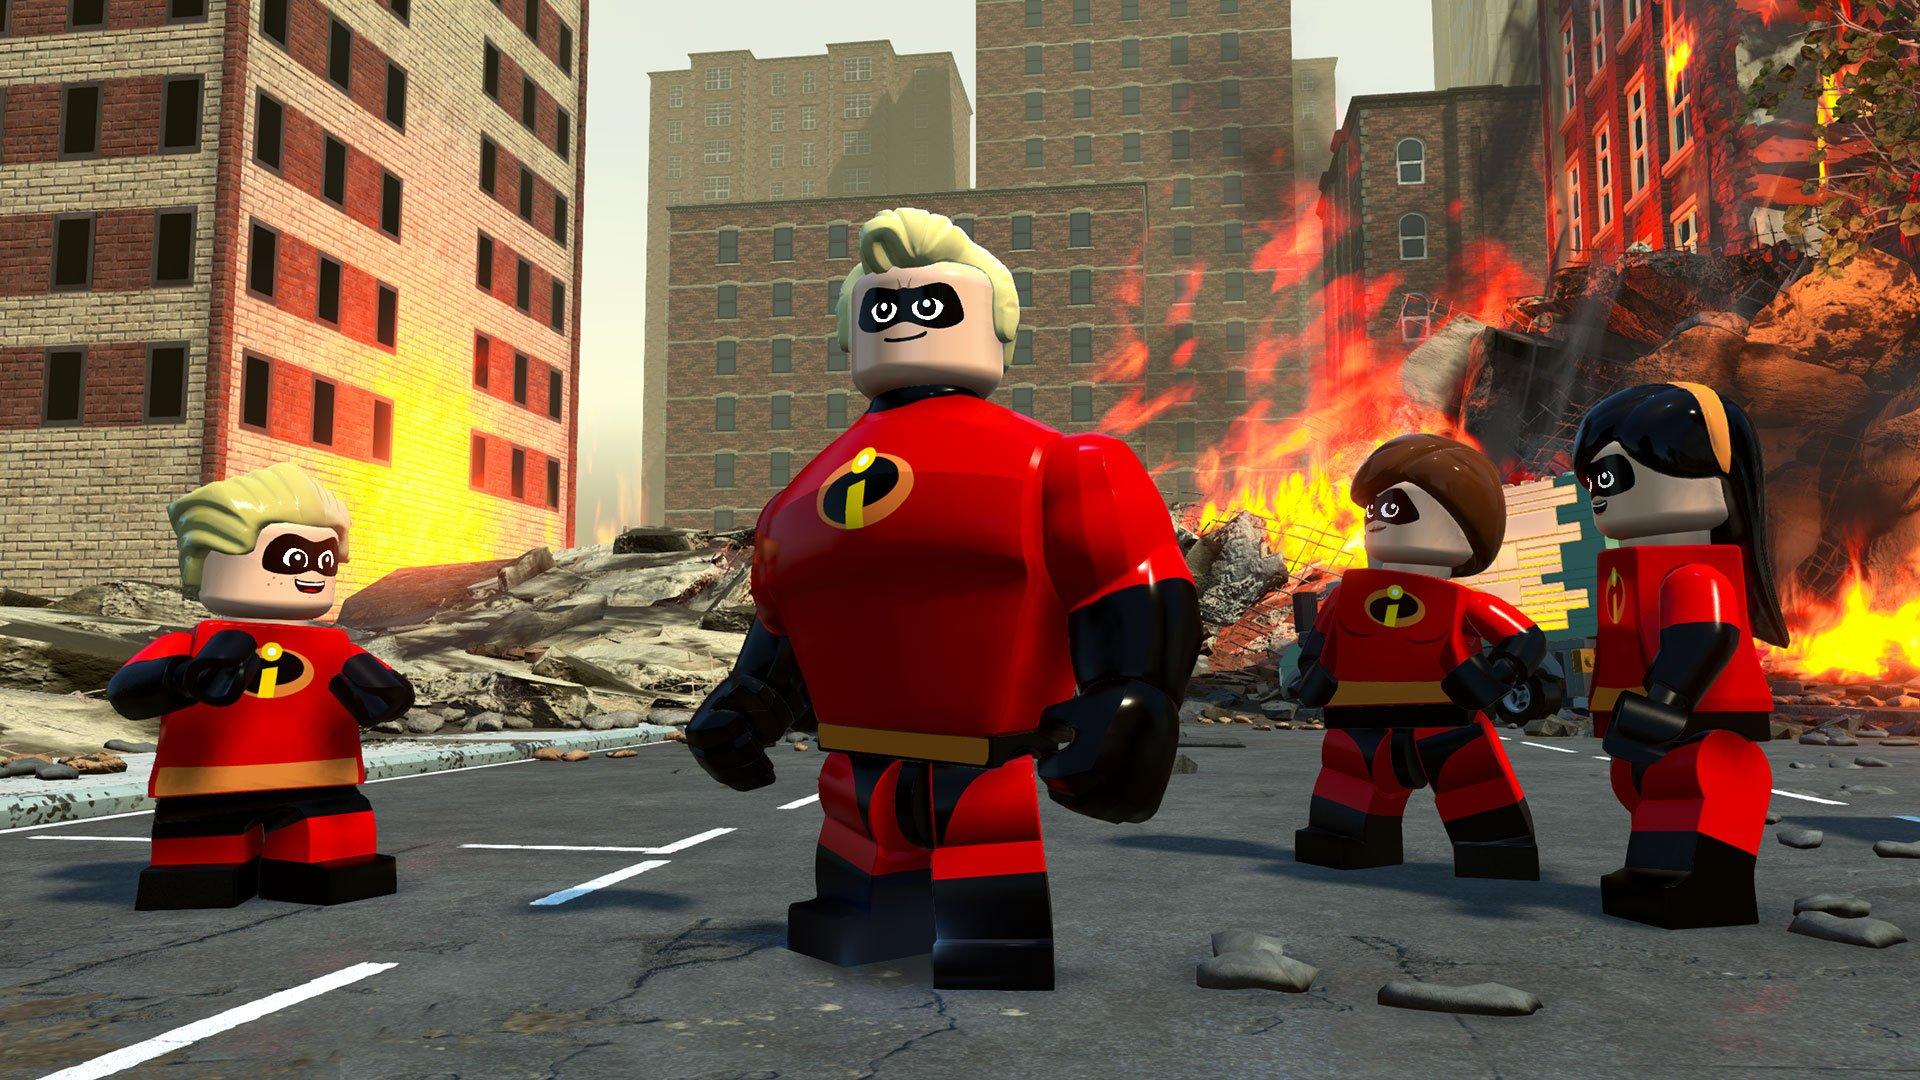 incredibles xbox one